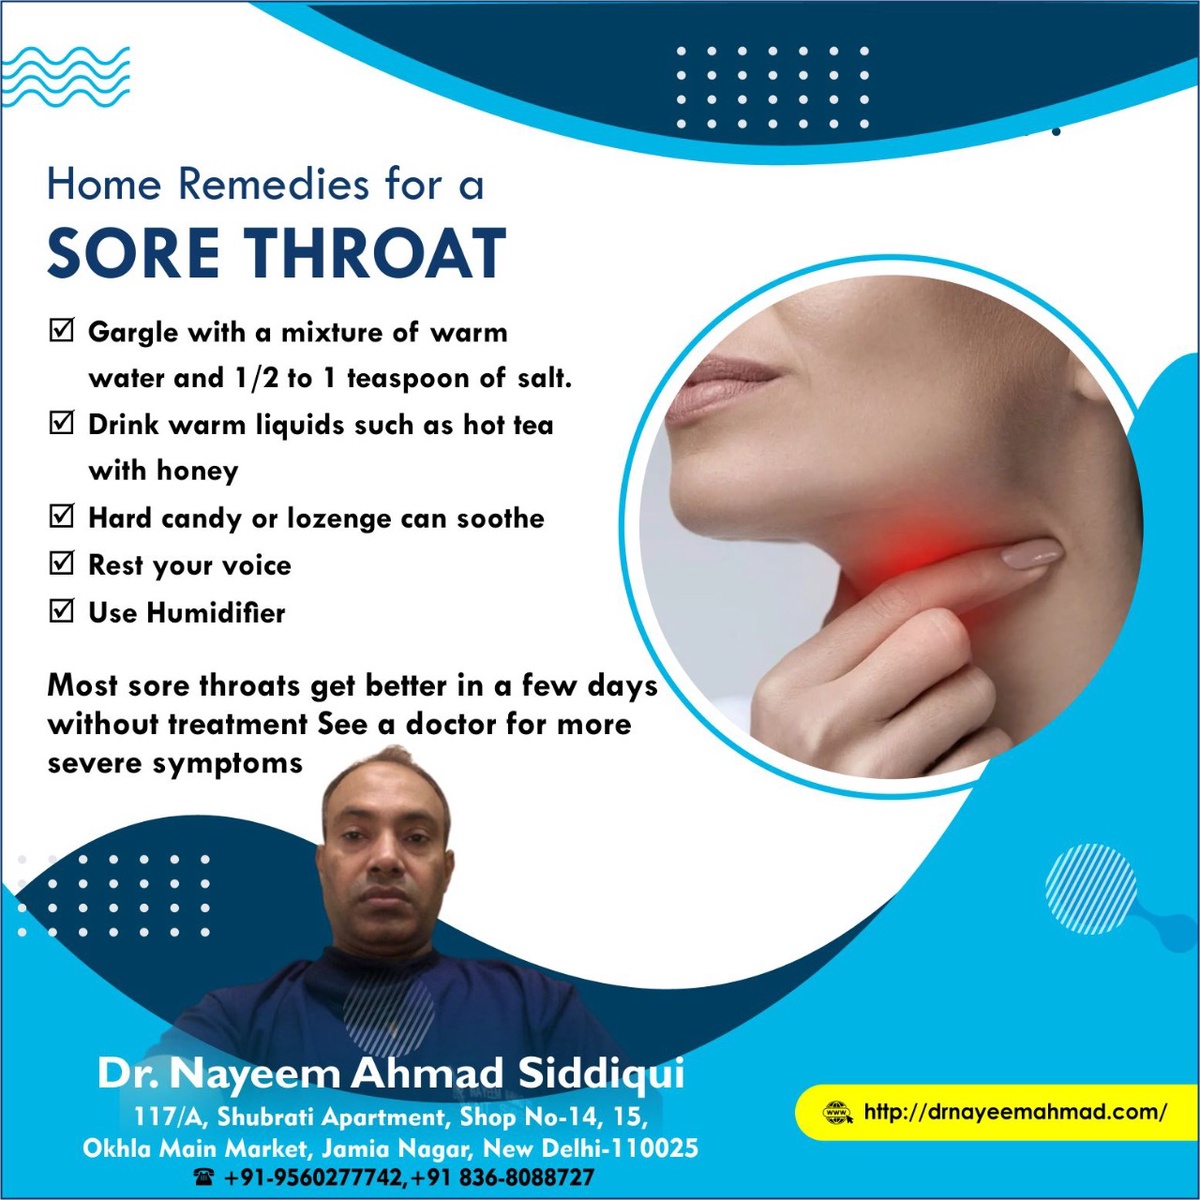 How to manage during a throat infection